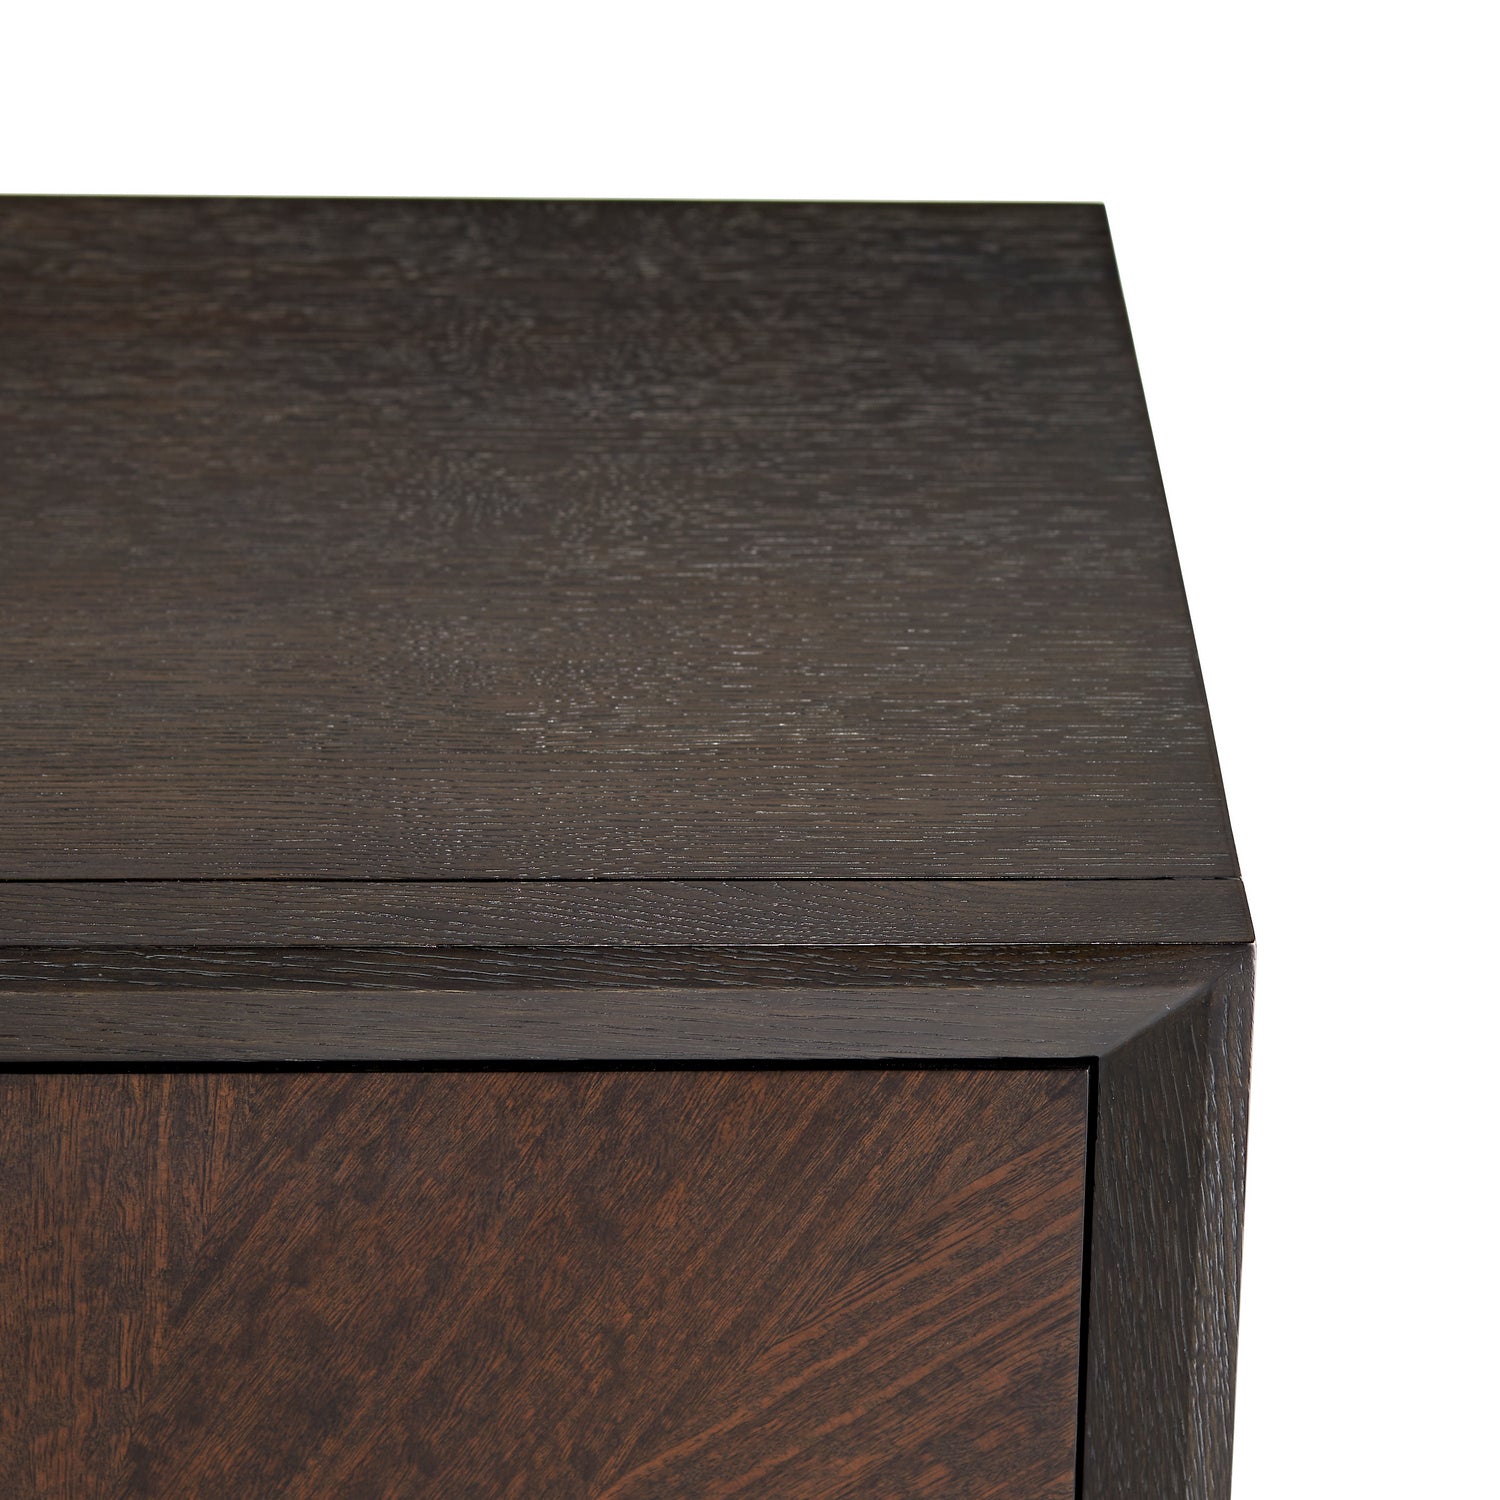 Cabinet from the Normandy collection in Sable finish